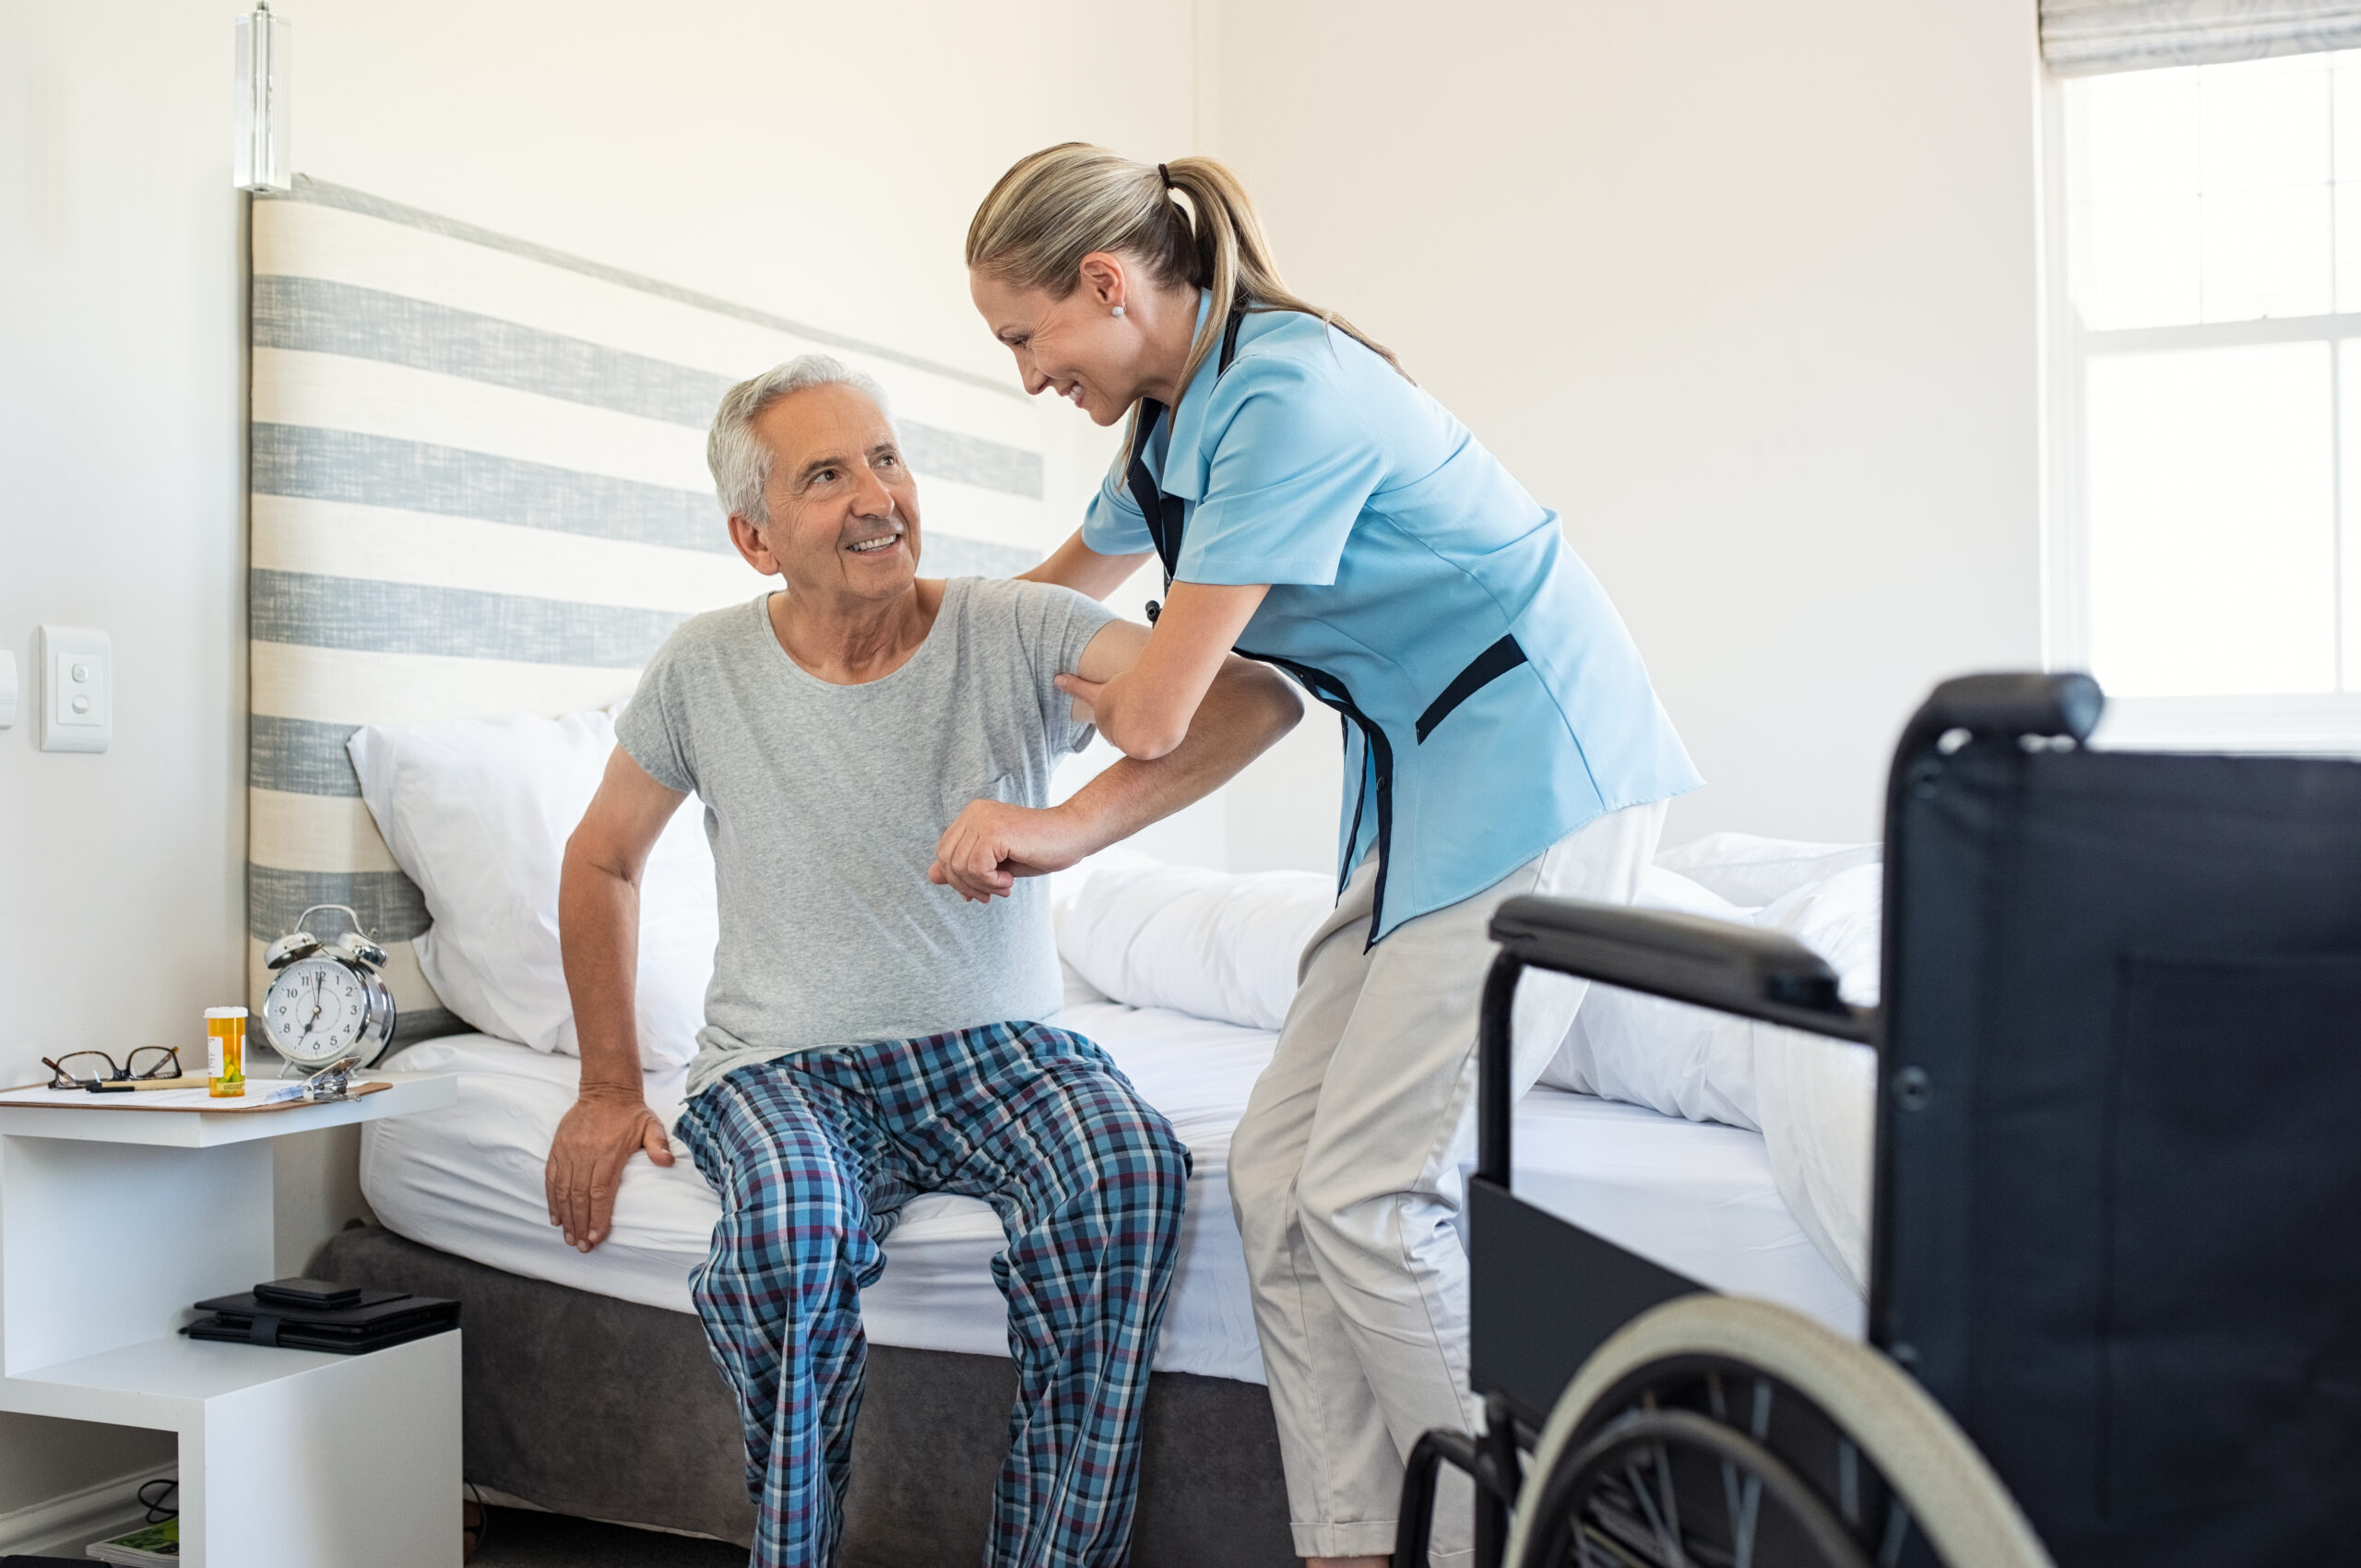 Smiling nurse assisting senior man to get up from bed. Caring nurse supporting patient while getting up from bed and move towards wheelchair at home. Helping elderly disabled man standing up in his bedroom.